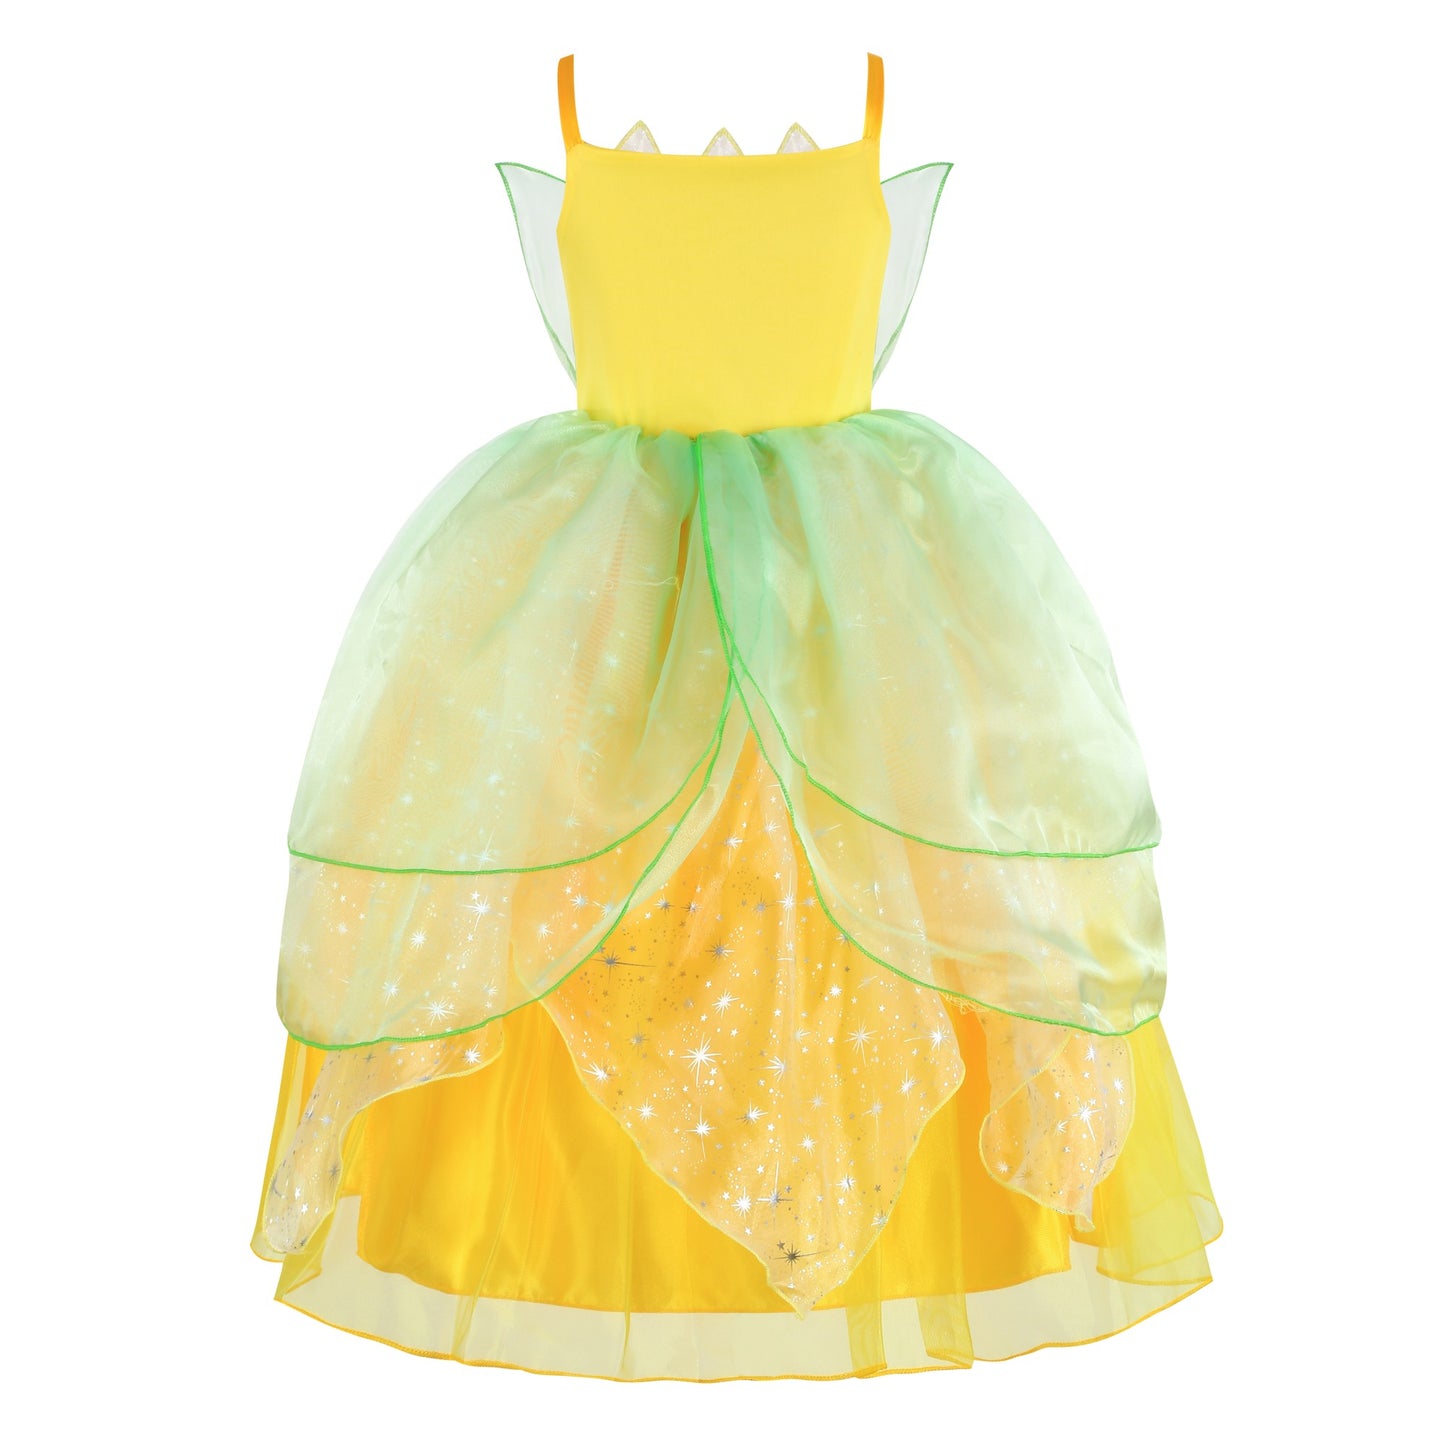 Foierp Costume Princess Dress for Kids with Crown and Wand for Party/Cosplay/Wedding